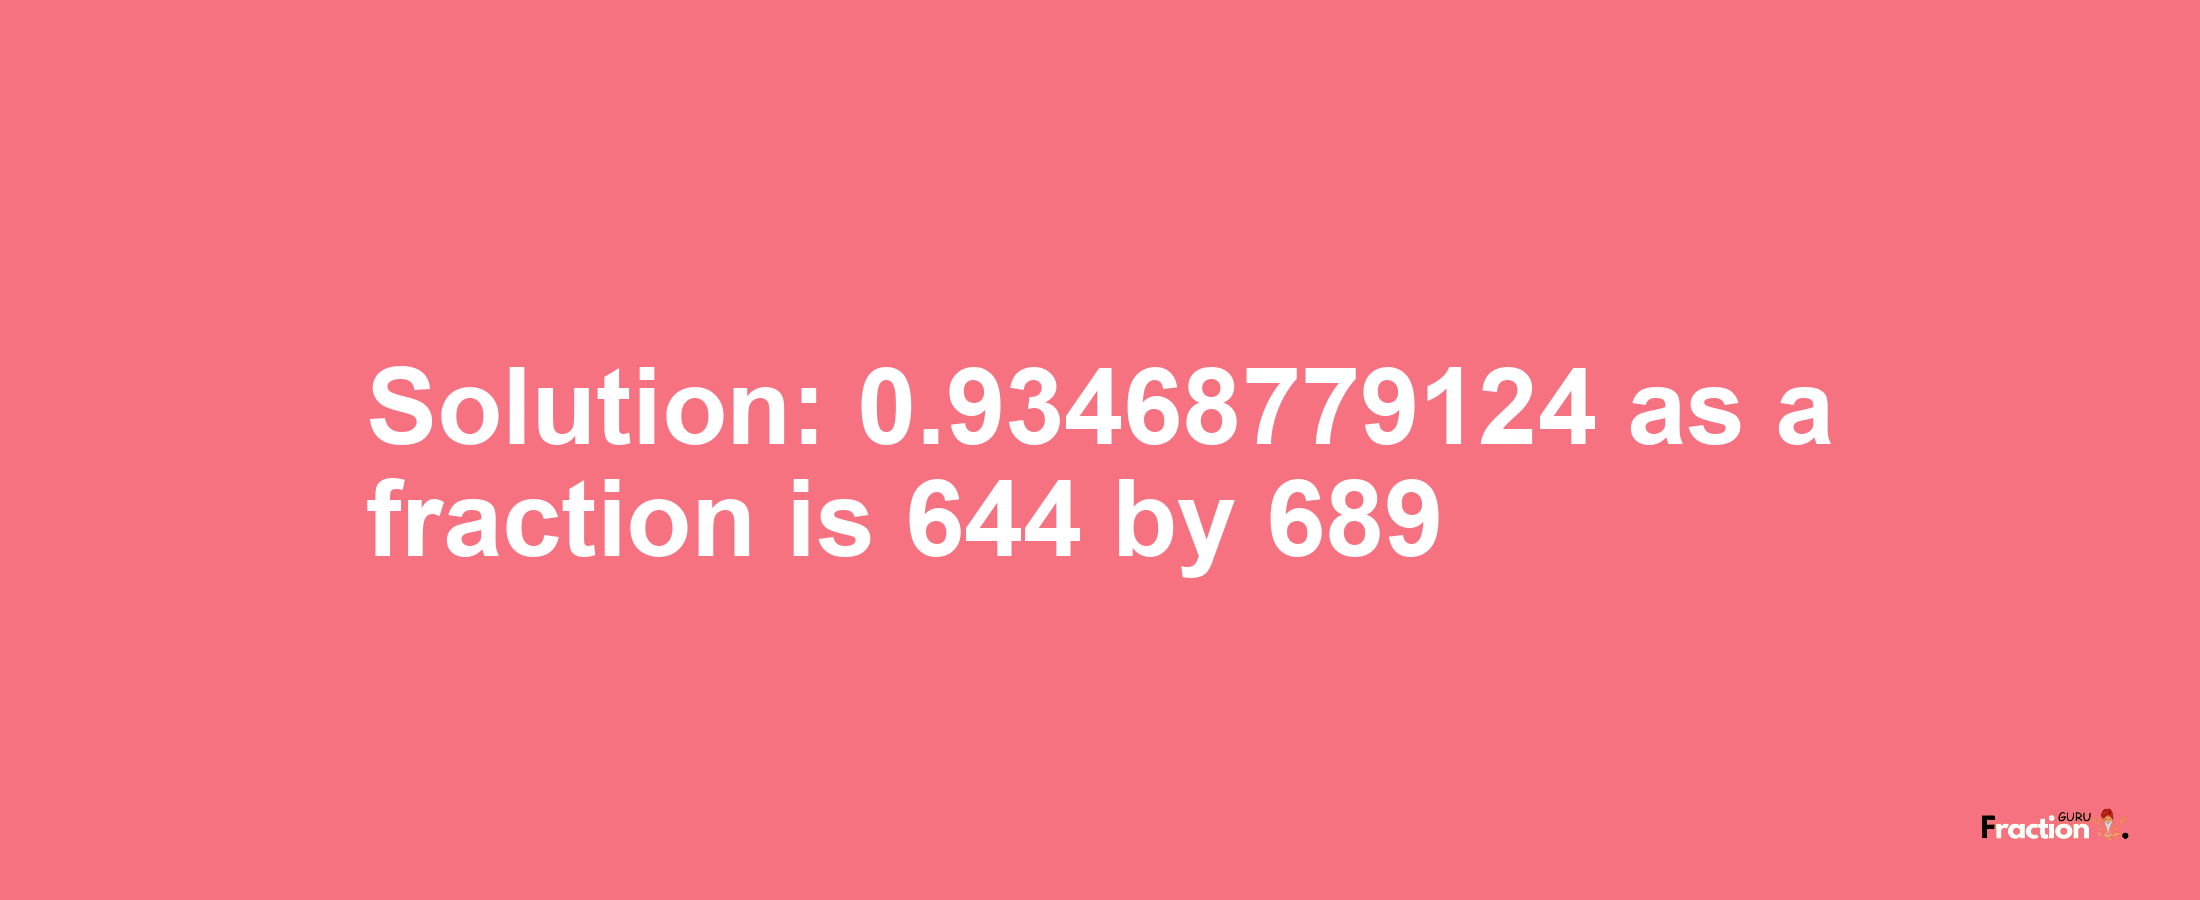 Solution:0.93468779124 as a fraction is 644/689